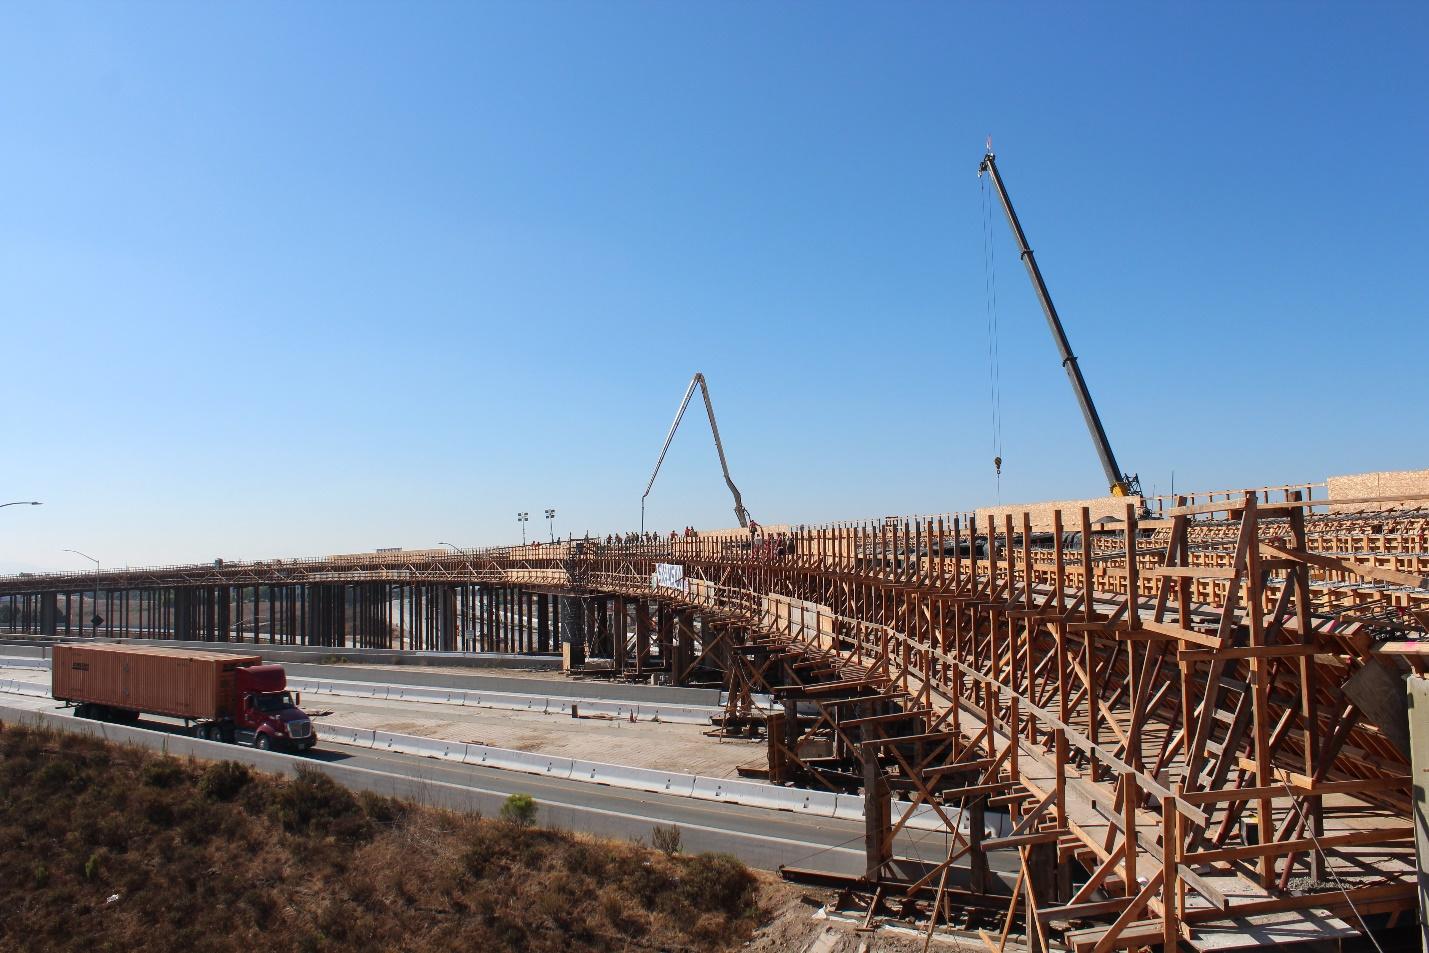 A side profile view of falsework, temporary wooden bridge support structures, for the future SR 125 to eastbound SR 11 connector.